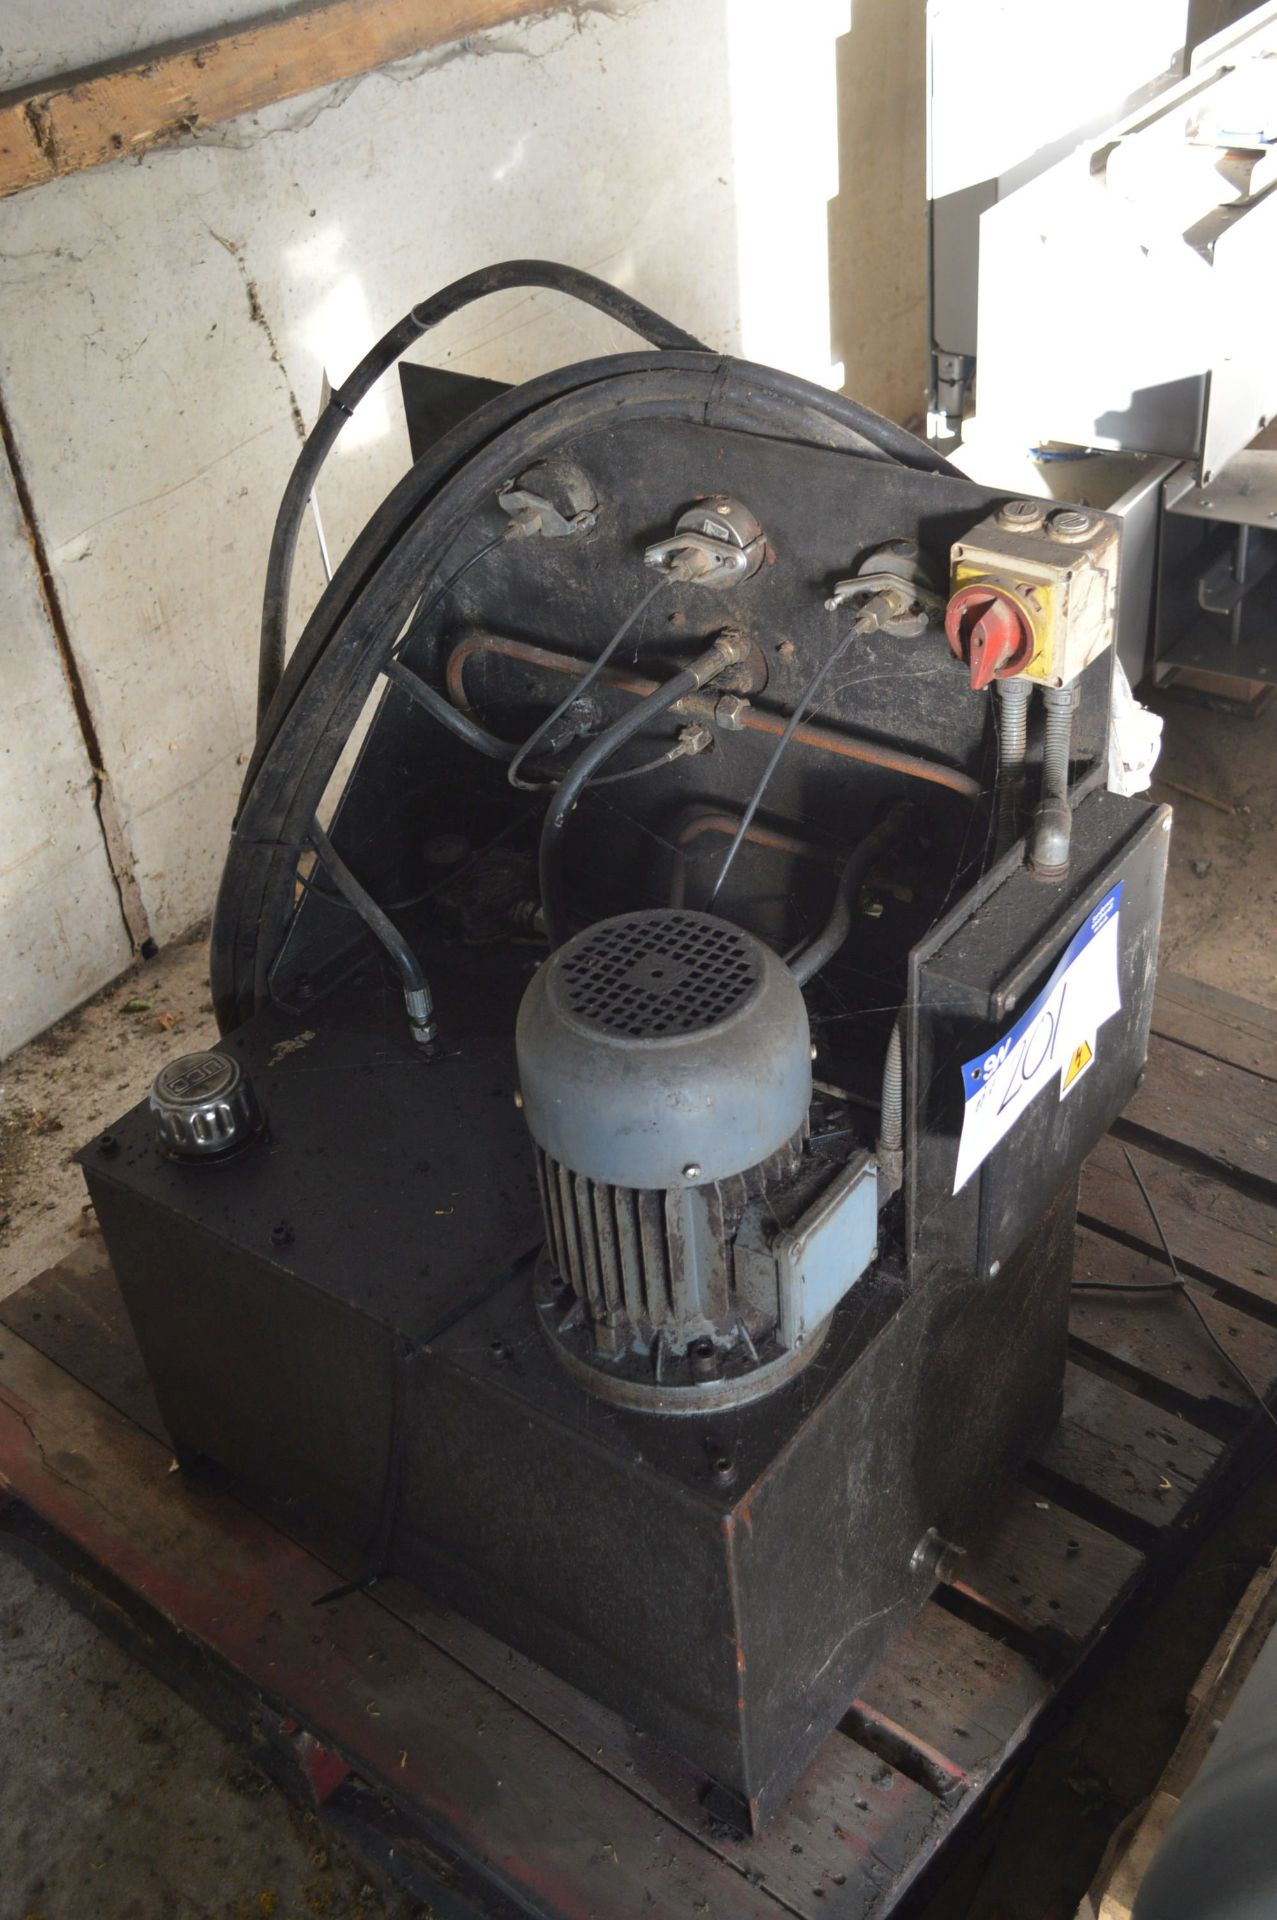 PTN BOA 500 x 1500 COMPACTOR, serial no. 132-95-003, CE1995, with electro/ hydraulic power pack & - Image 15 of 16